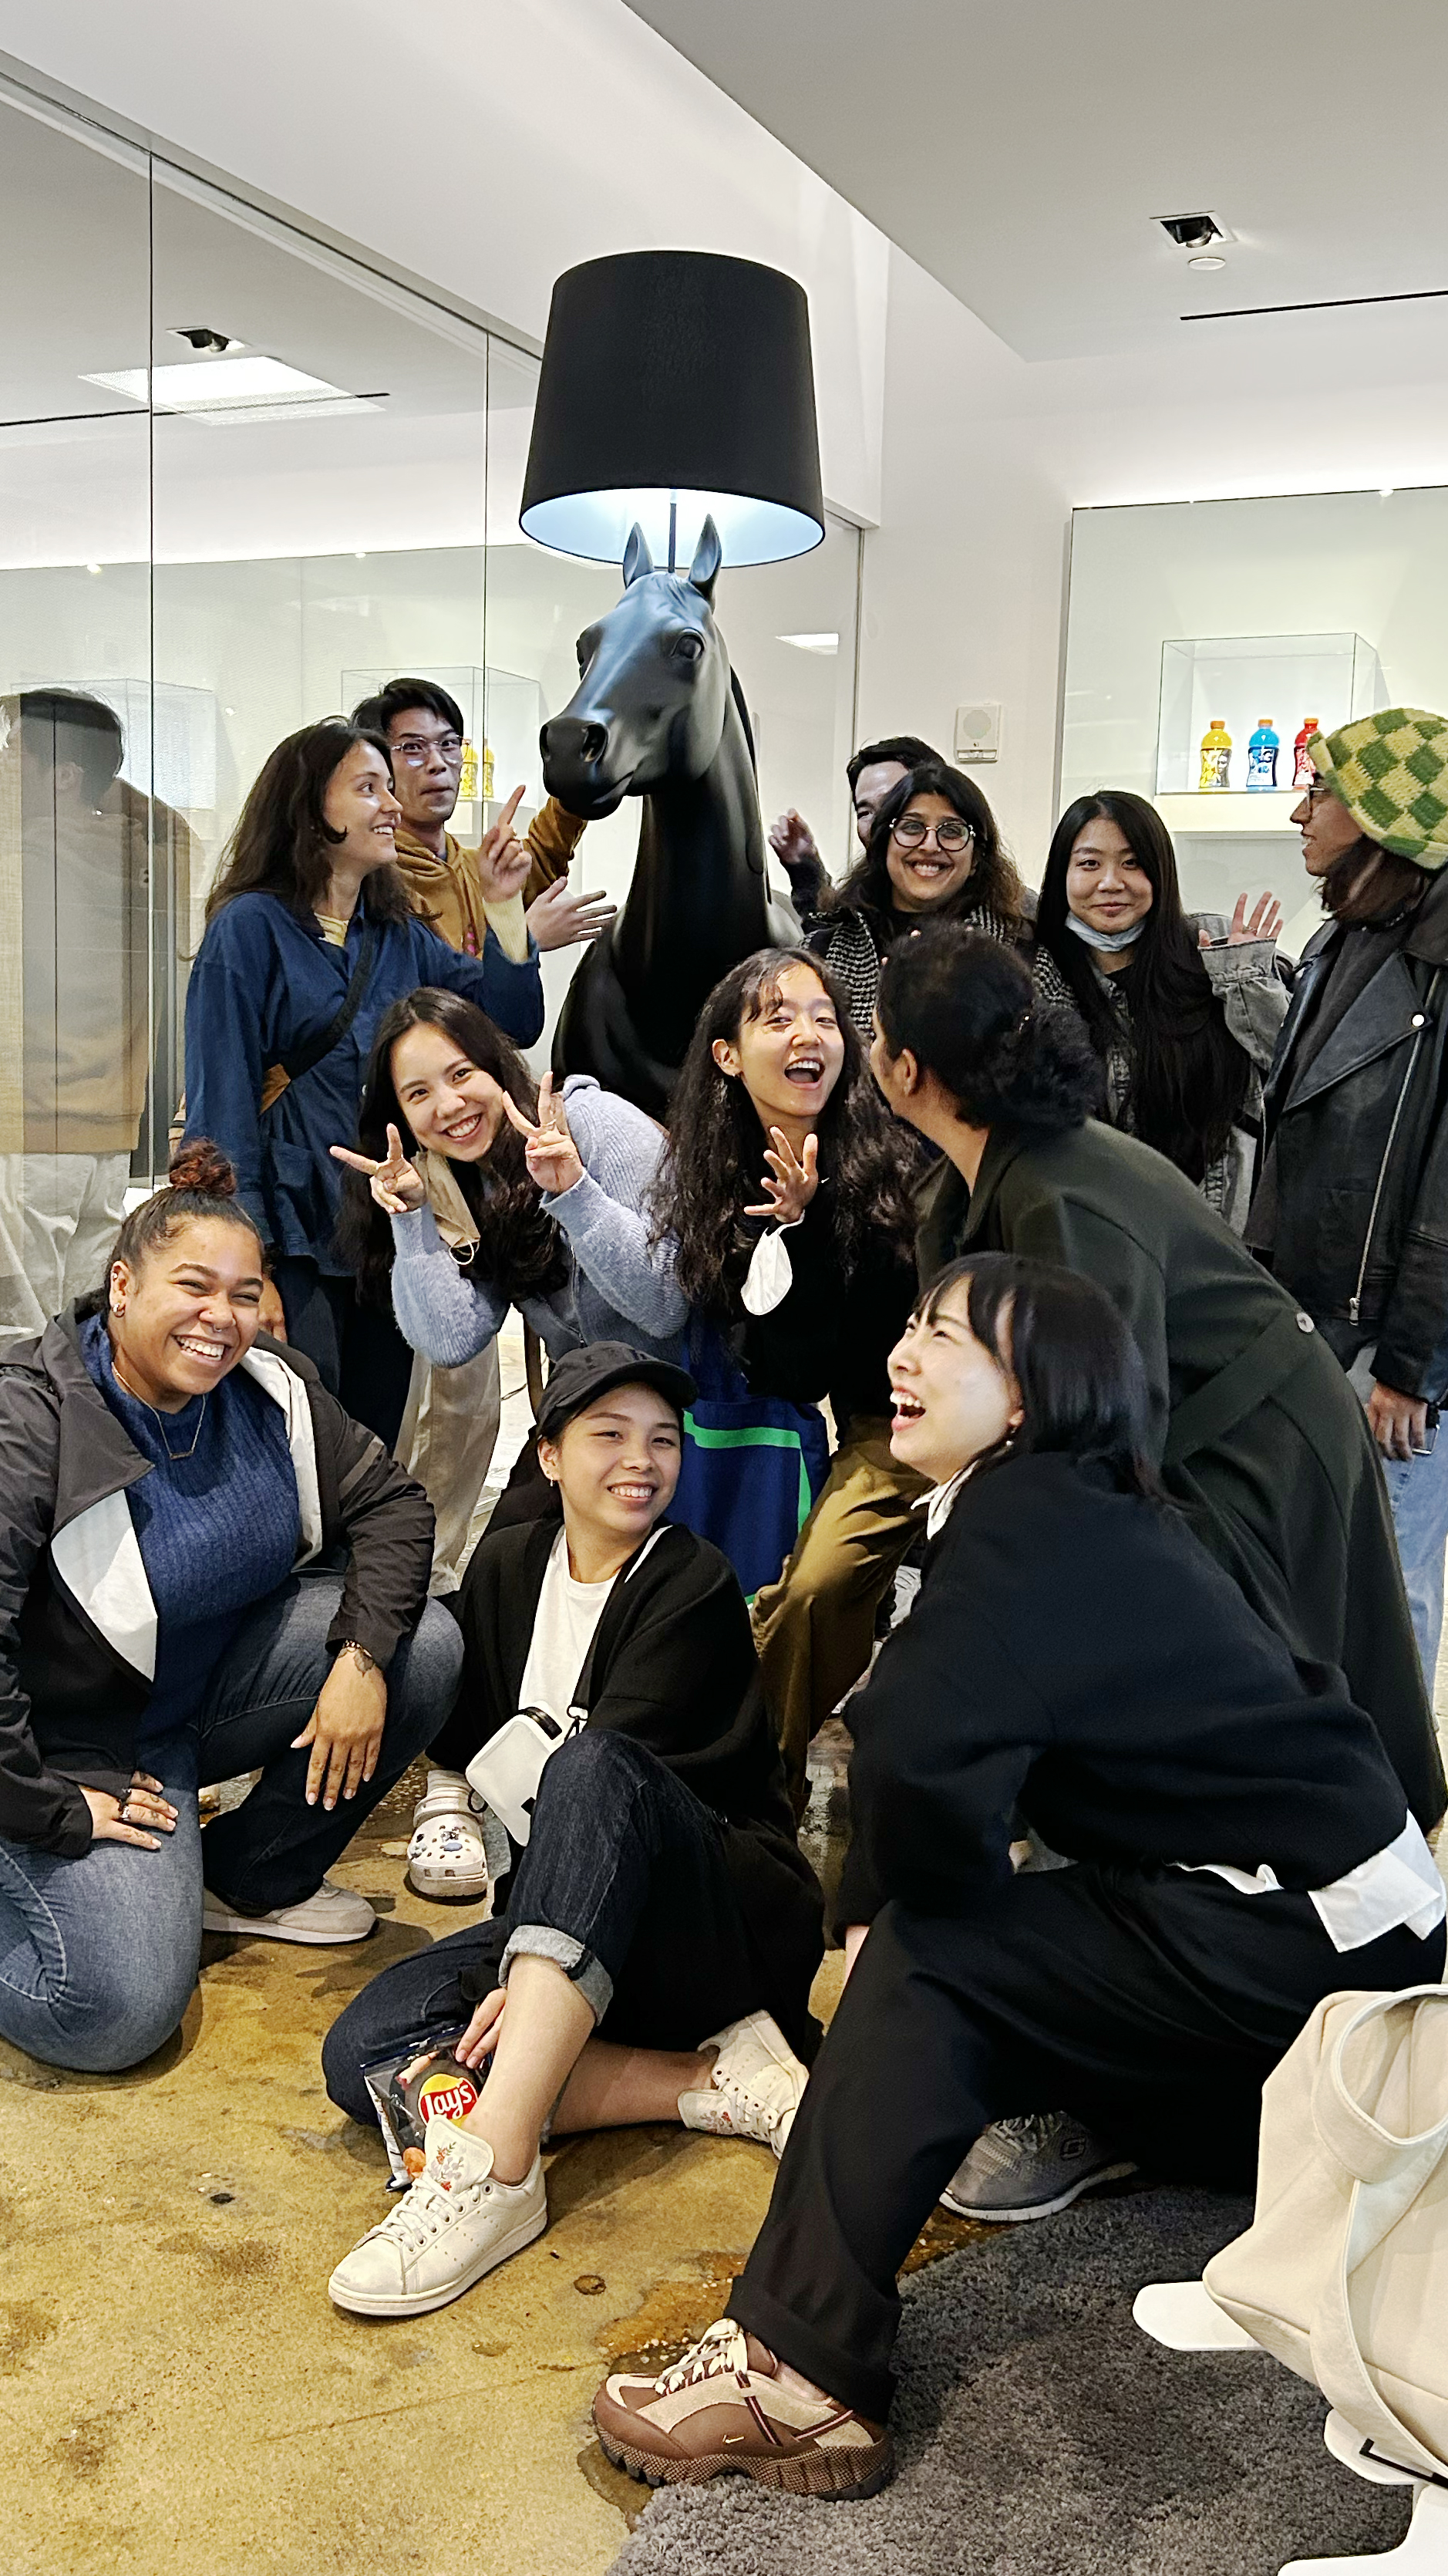 group photo of smiling students at the PepsiCo headquarters.